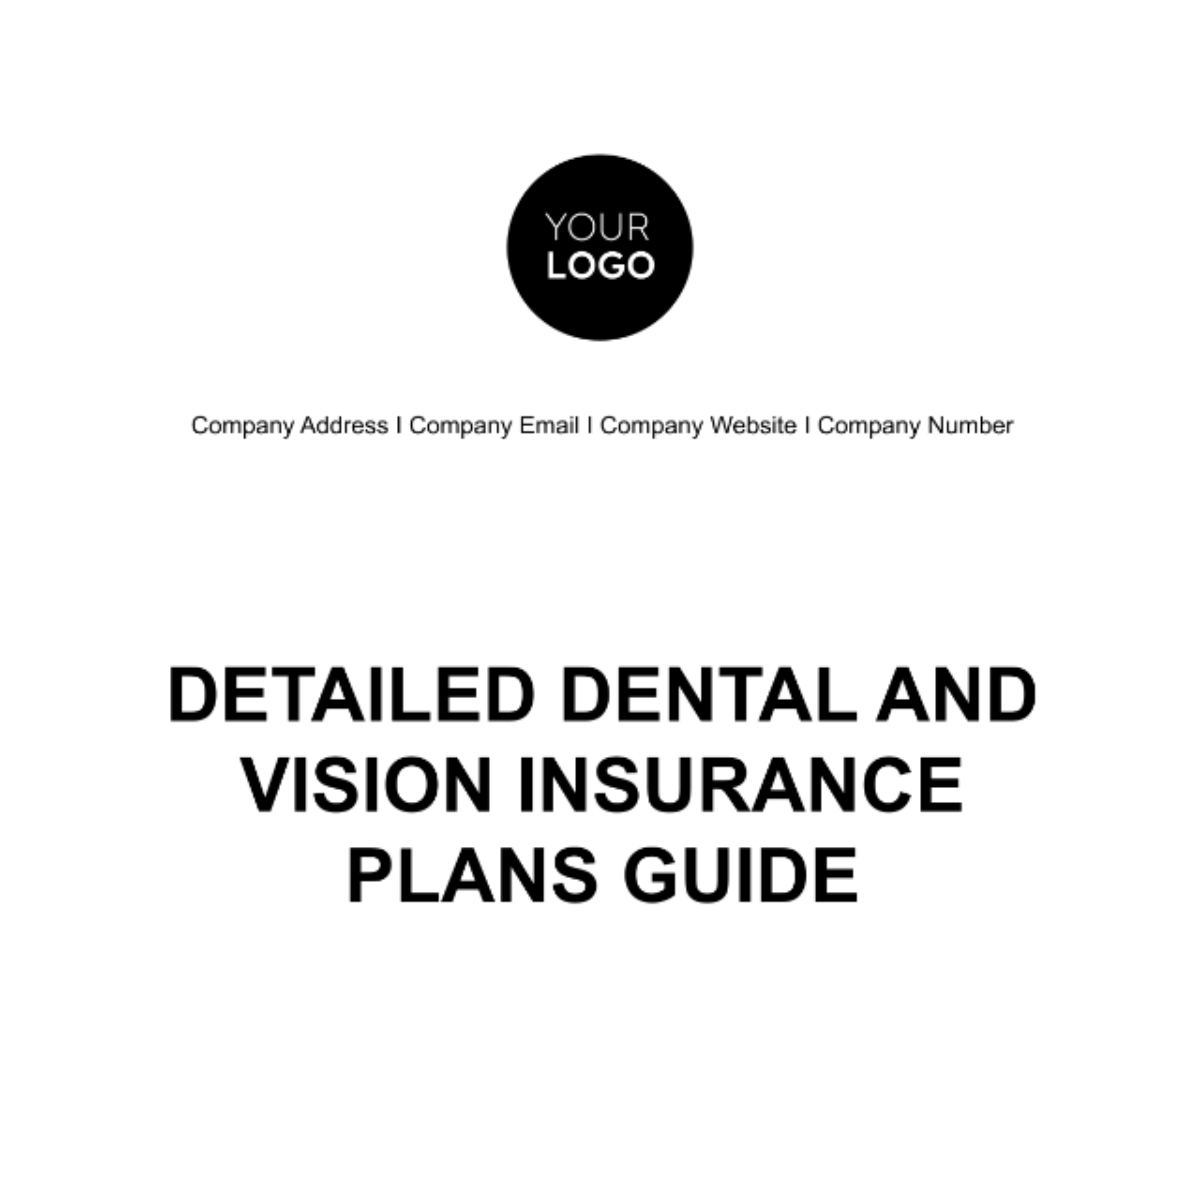 Detailed Dental and Vision Insurance Plans Guide HR Template